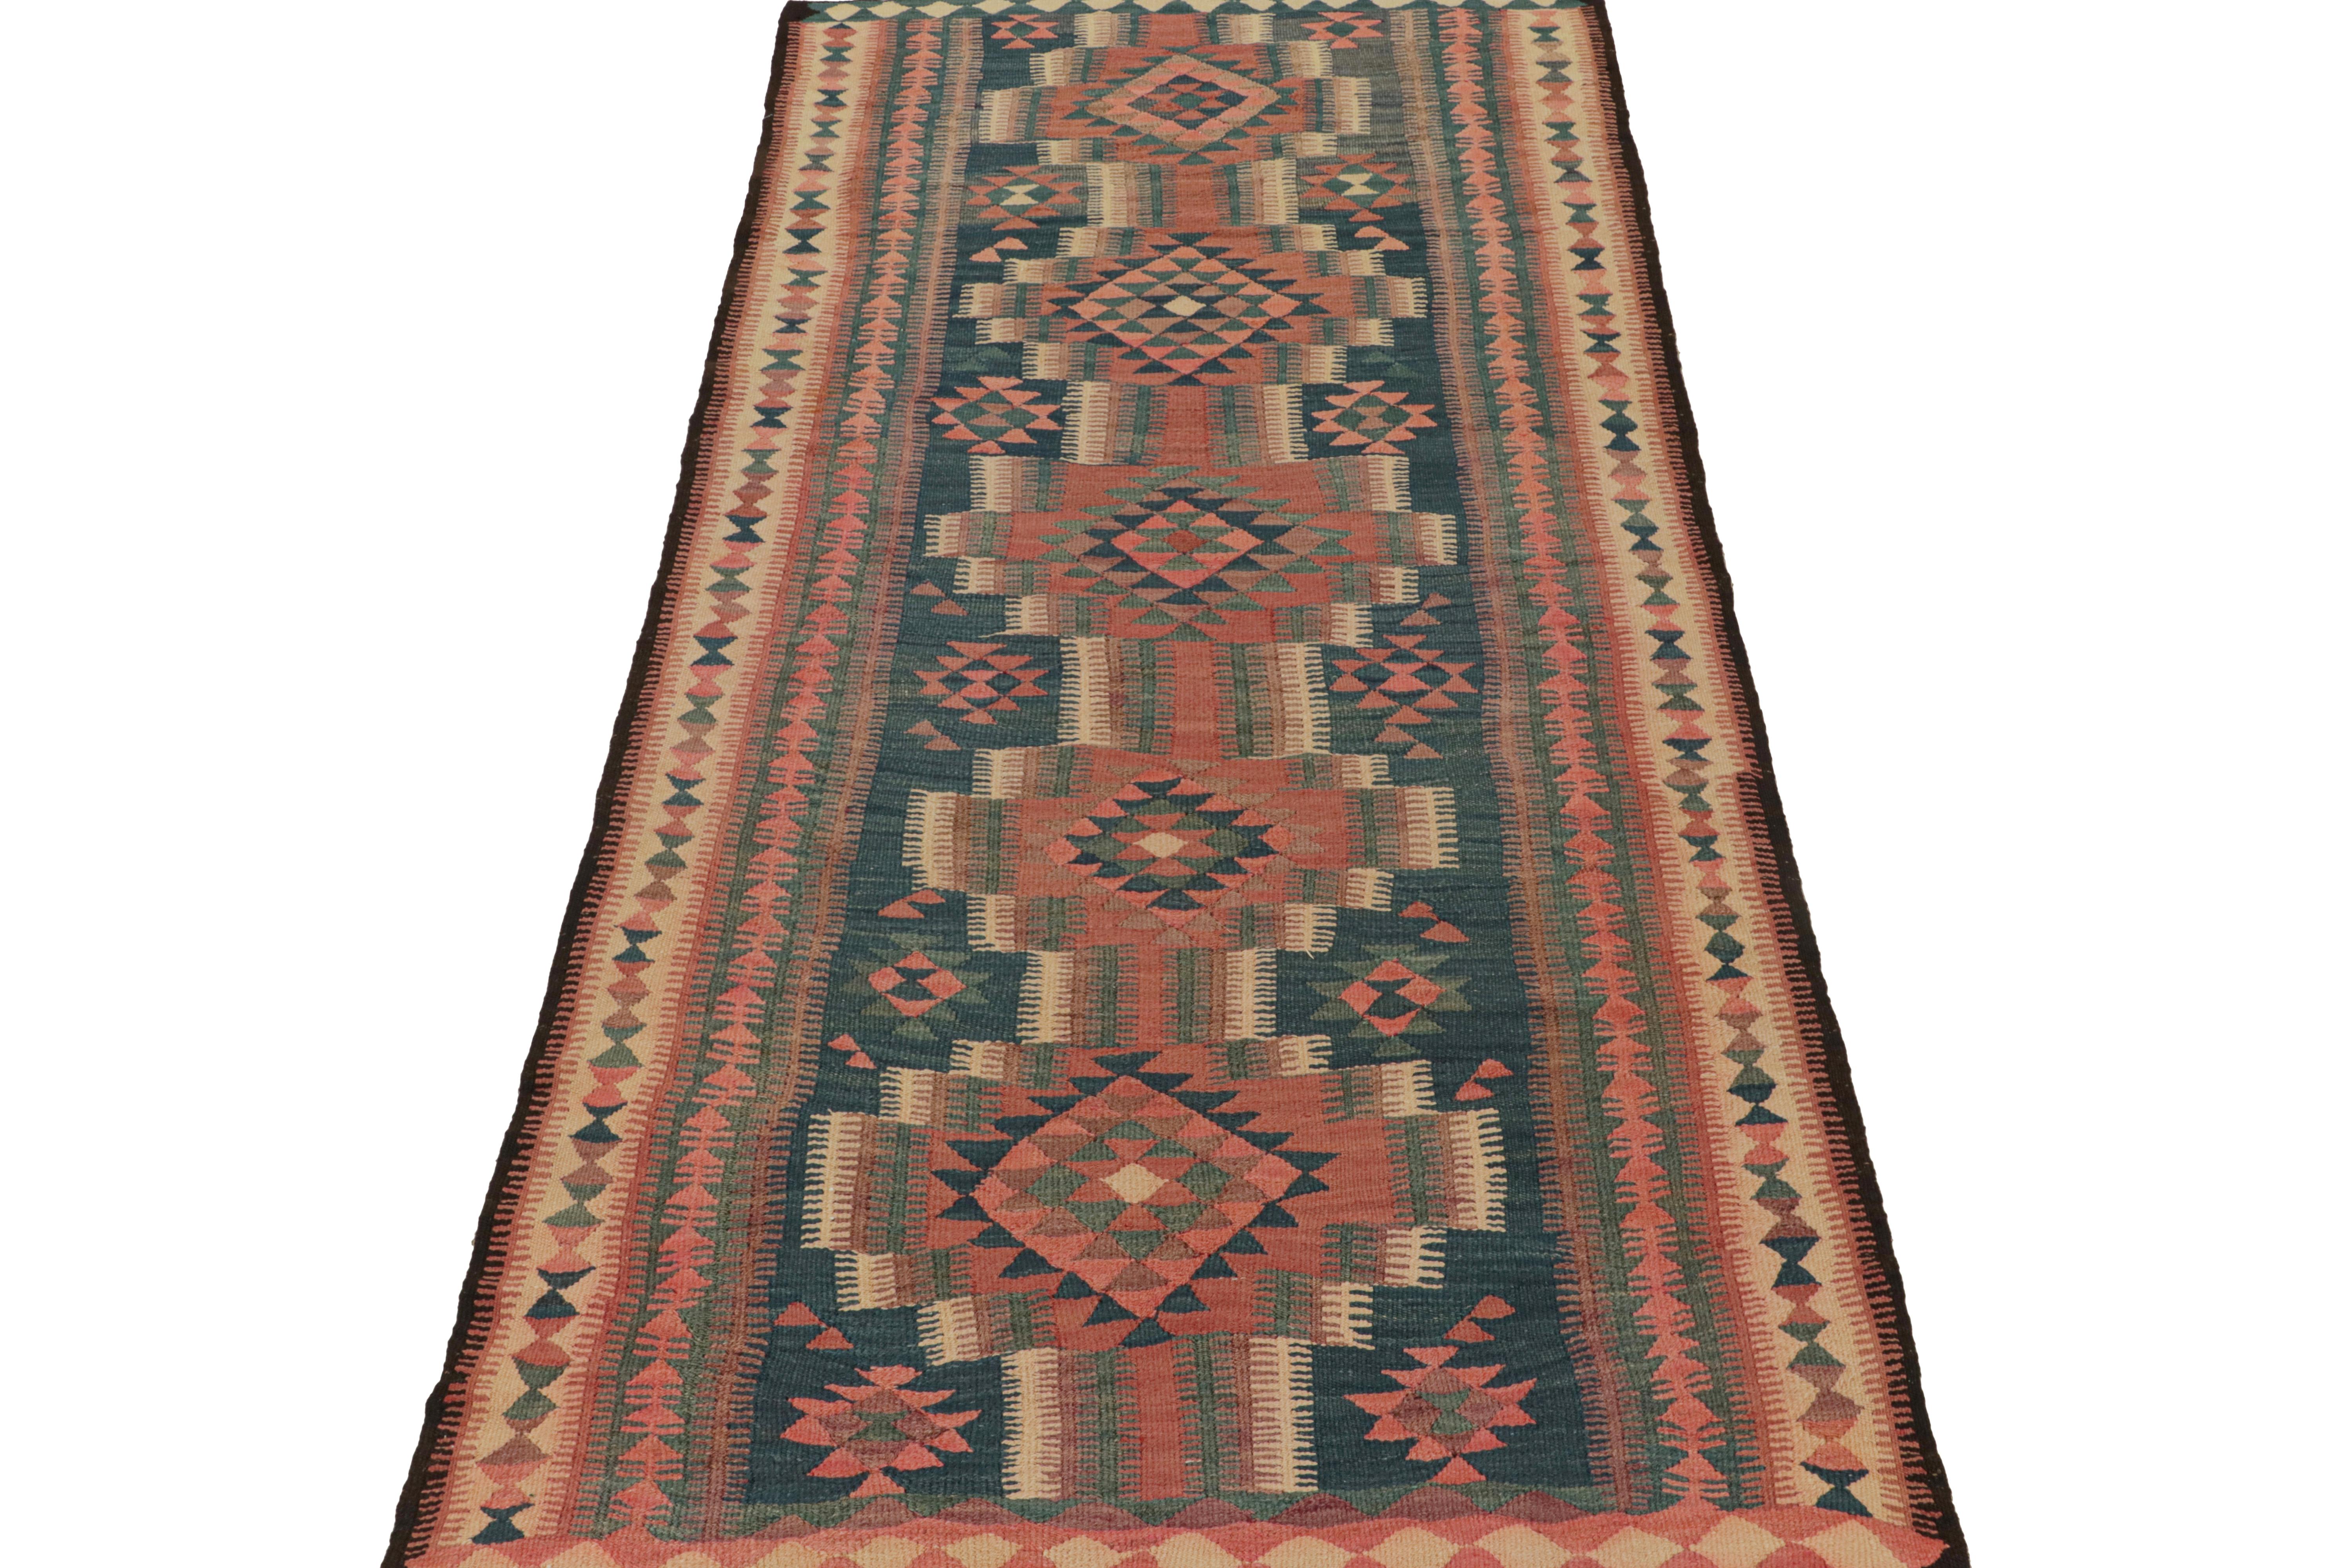 This vintage 5x10 Persian Kilim is believed to be a Kurdish tribal runner of the 1950s. 

Handwoven in wool, its design enjoys geometric patterns in brick red and navy blue with teal and beige accents. It’s an exemplary work of Persian Folk Art